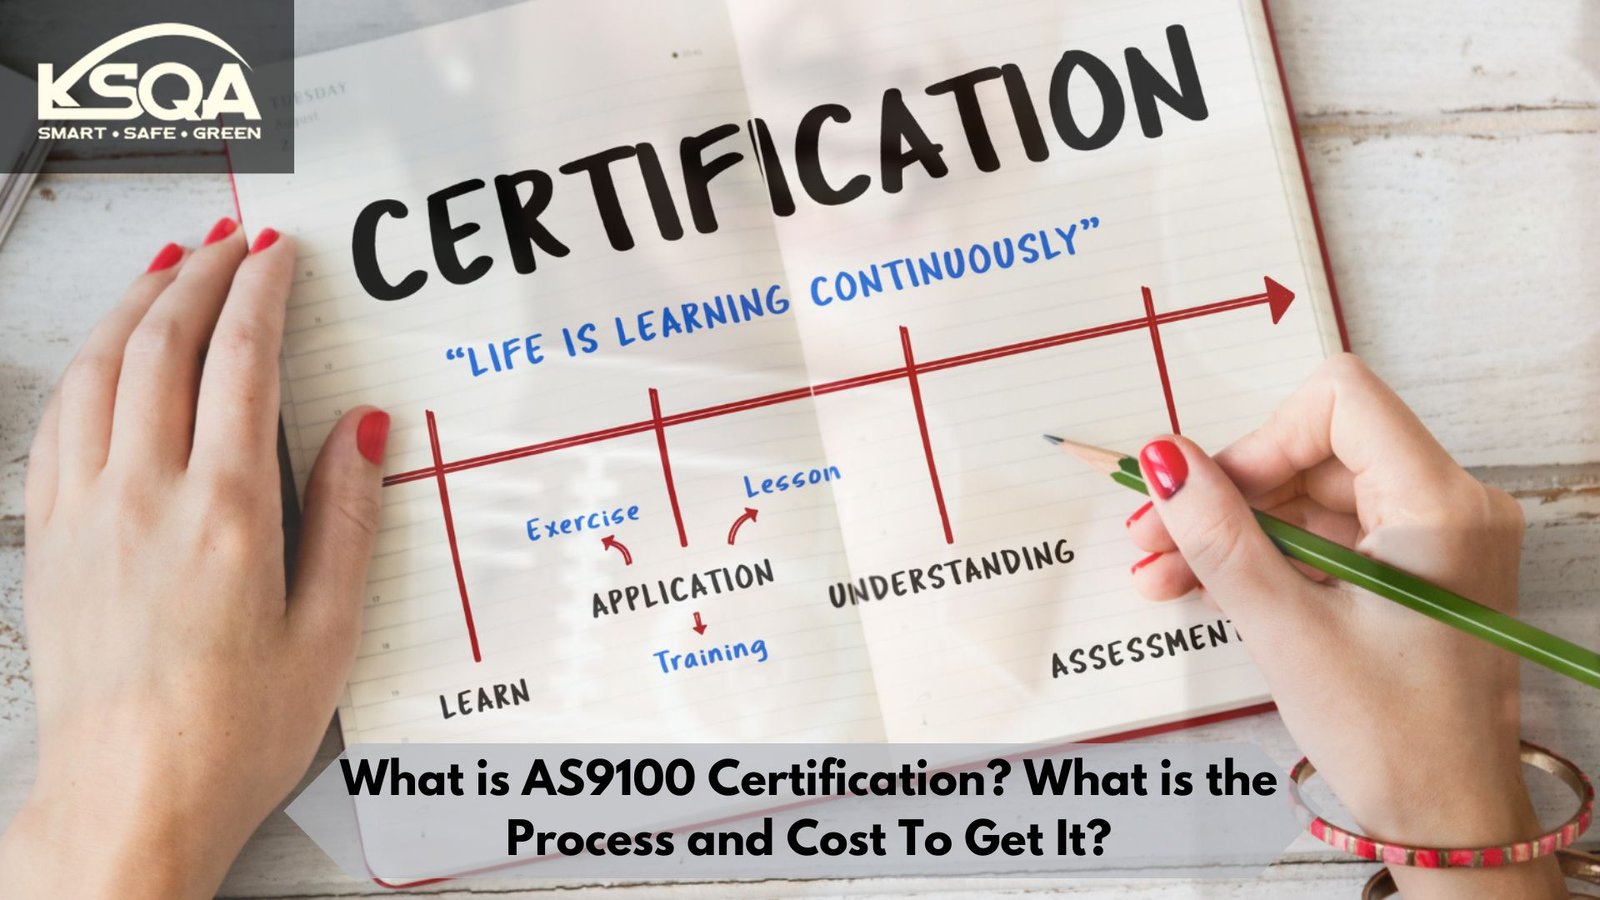 What is AS9100 Certification? What is the Process and Cost To Get It?